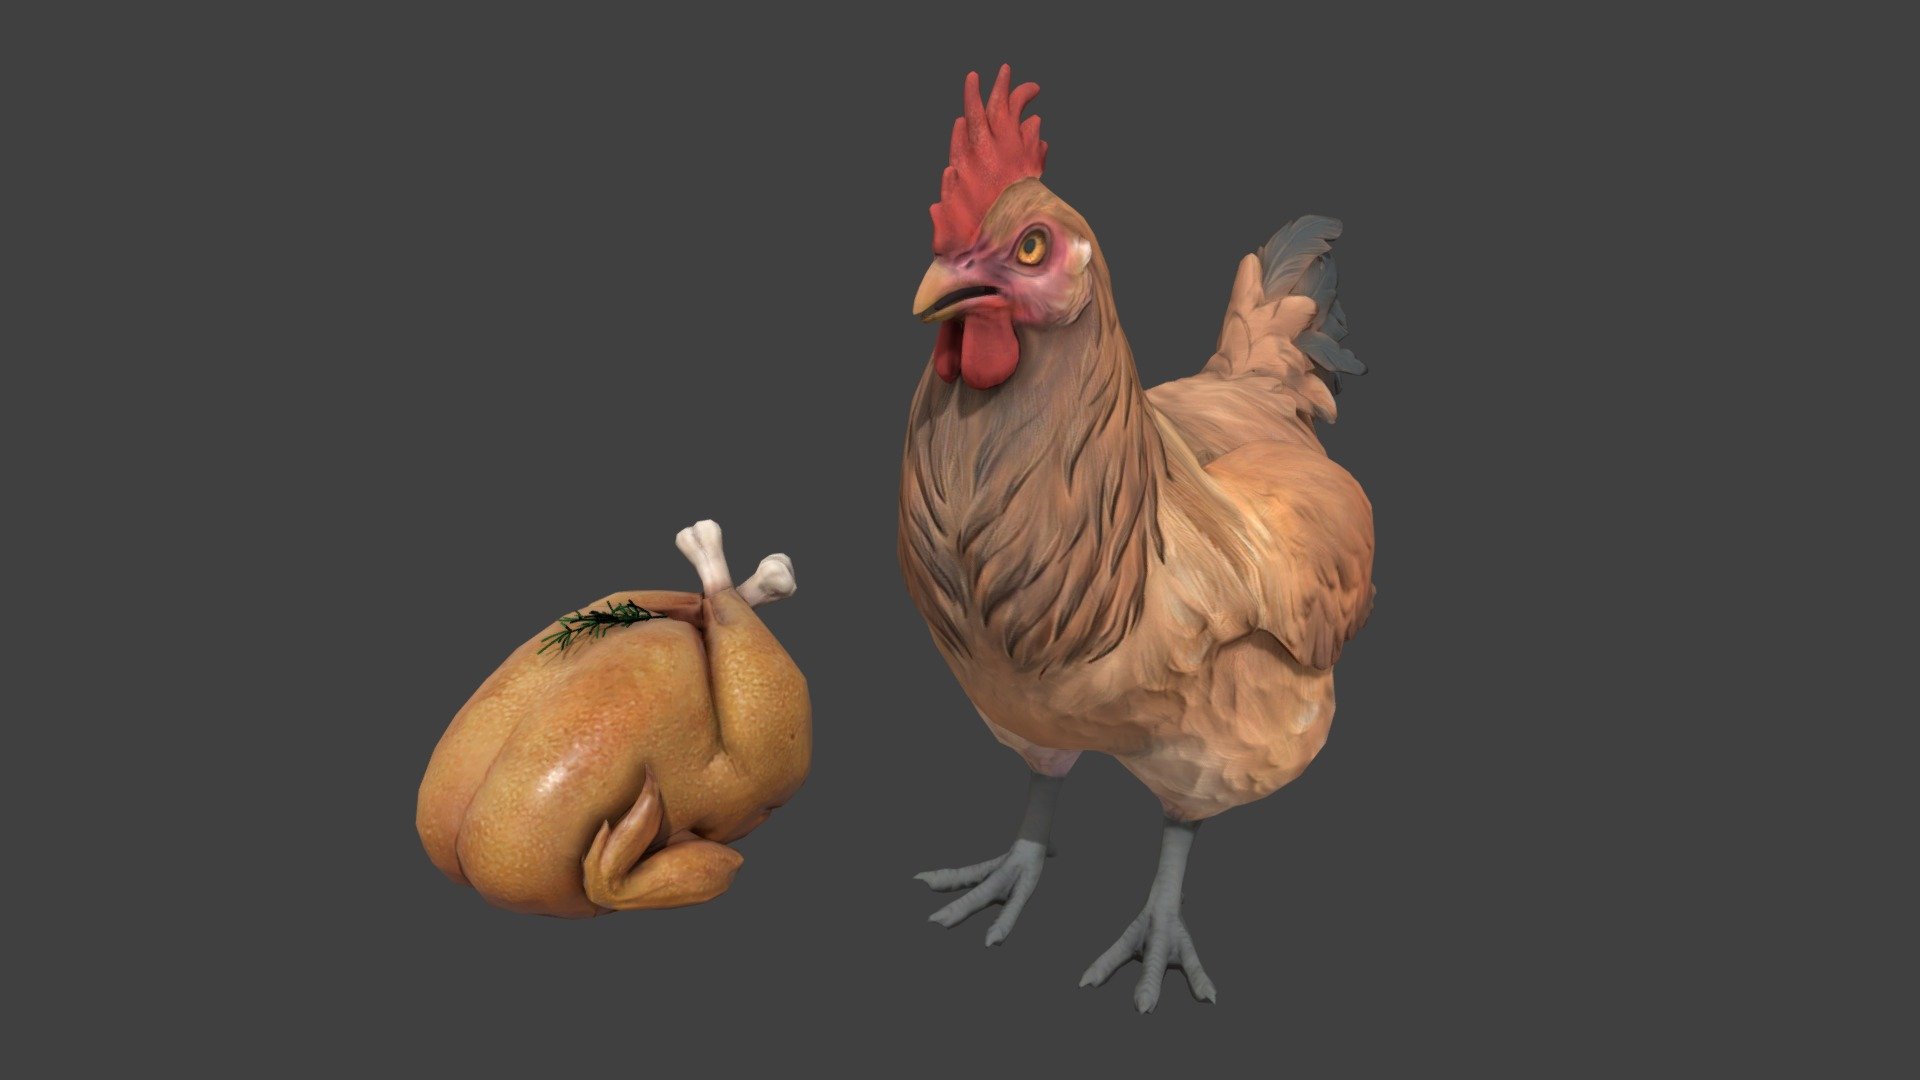 CSGO / CS2 character (agent).

You can download it for FREE. 

GLB counter-strike model.

Enjoy!

Check my profile for more models.

Rigged and Animated.

Credits: Valve - ANIMAL & FOOD | Chicken Model (CS2) - Download Free 3D model by 6lucius 3d model